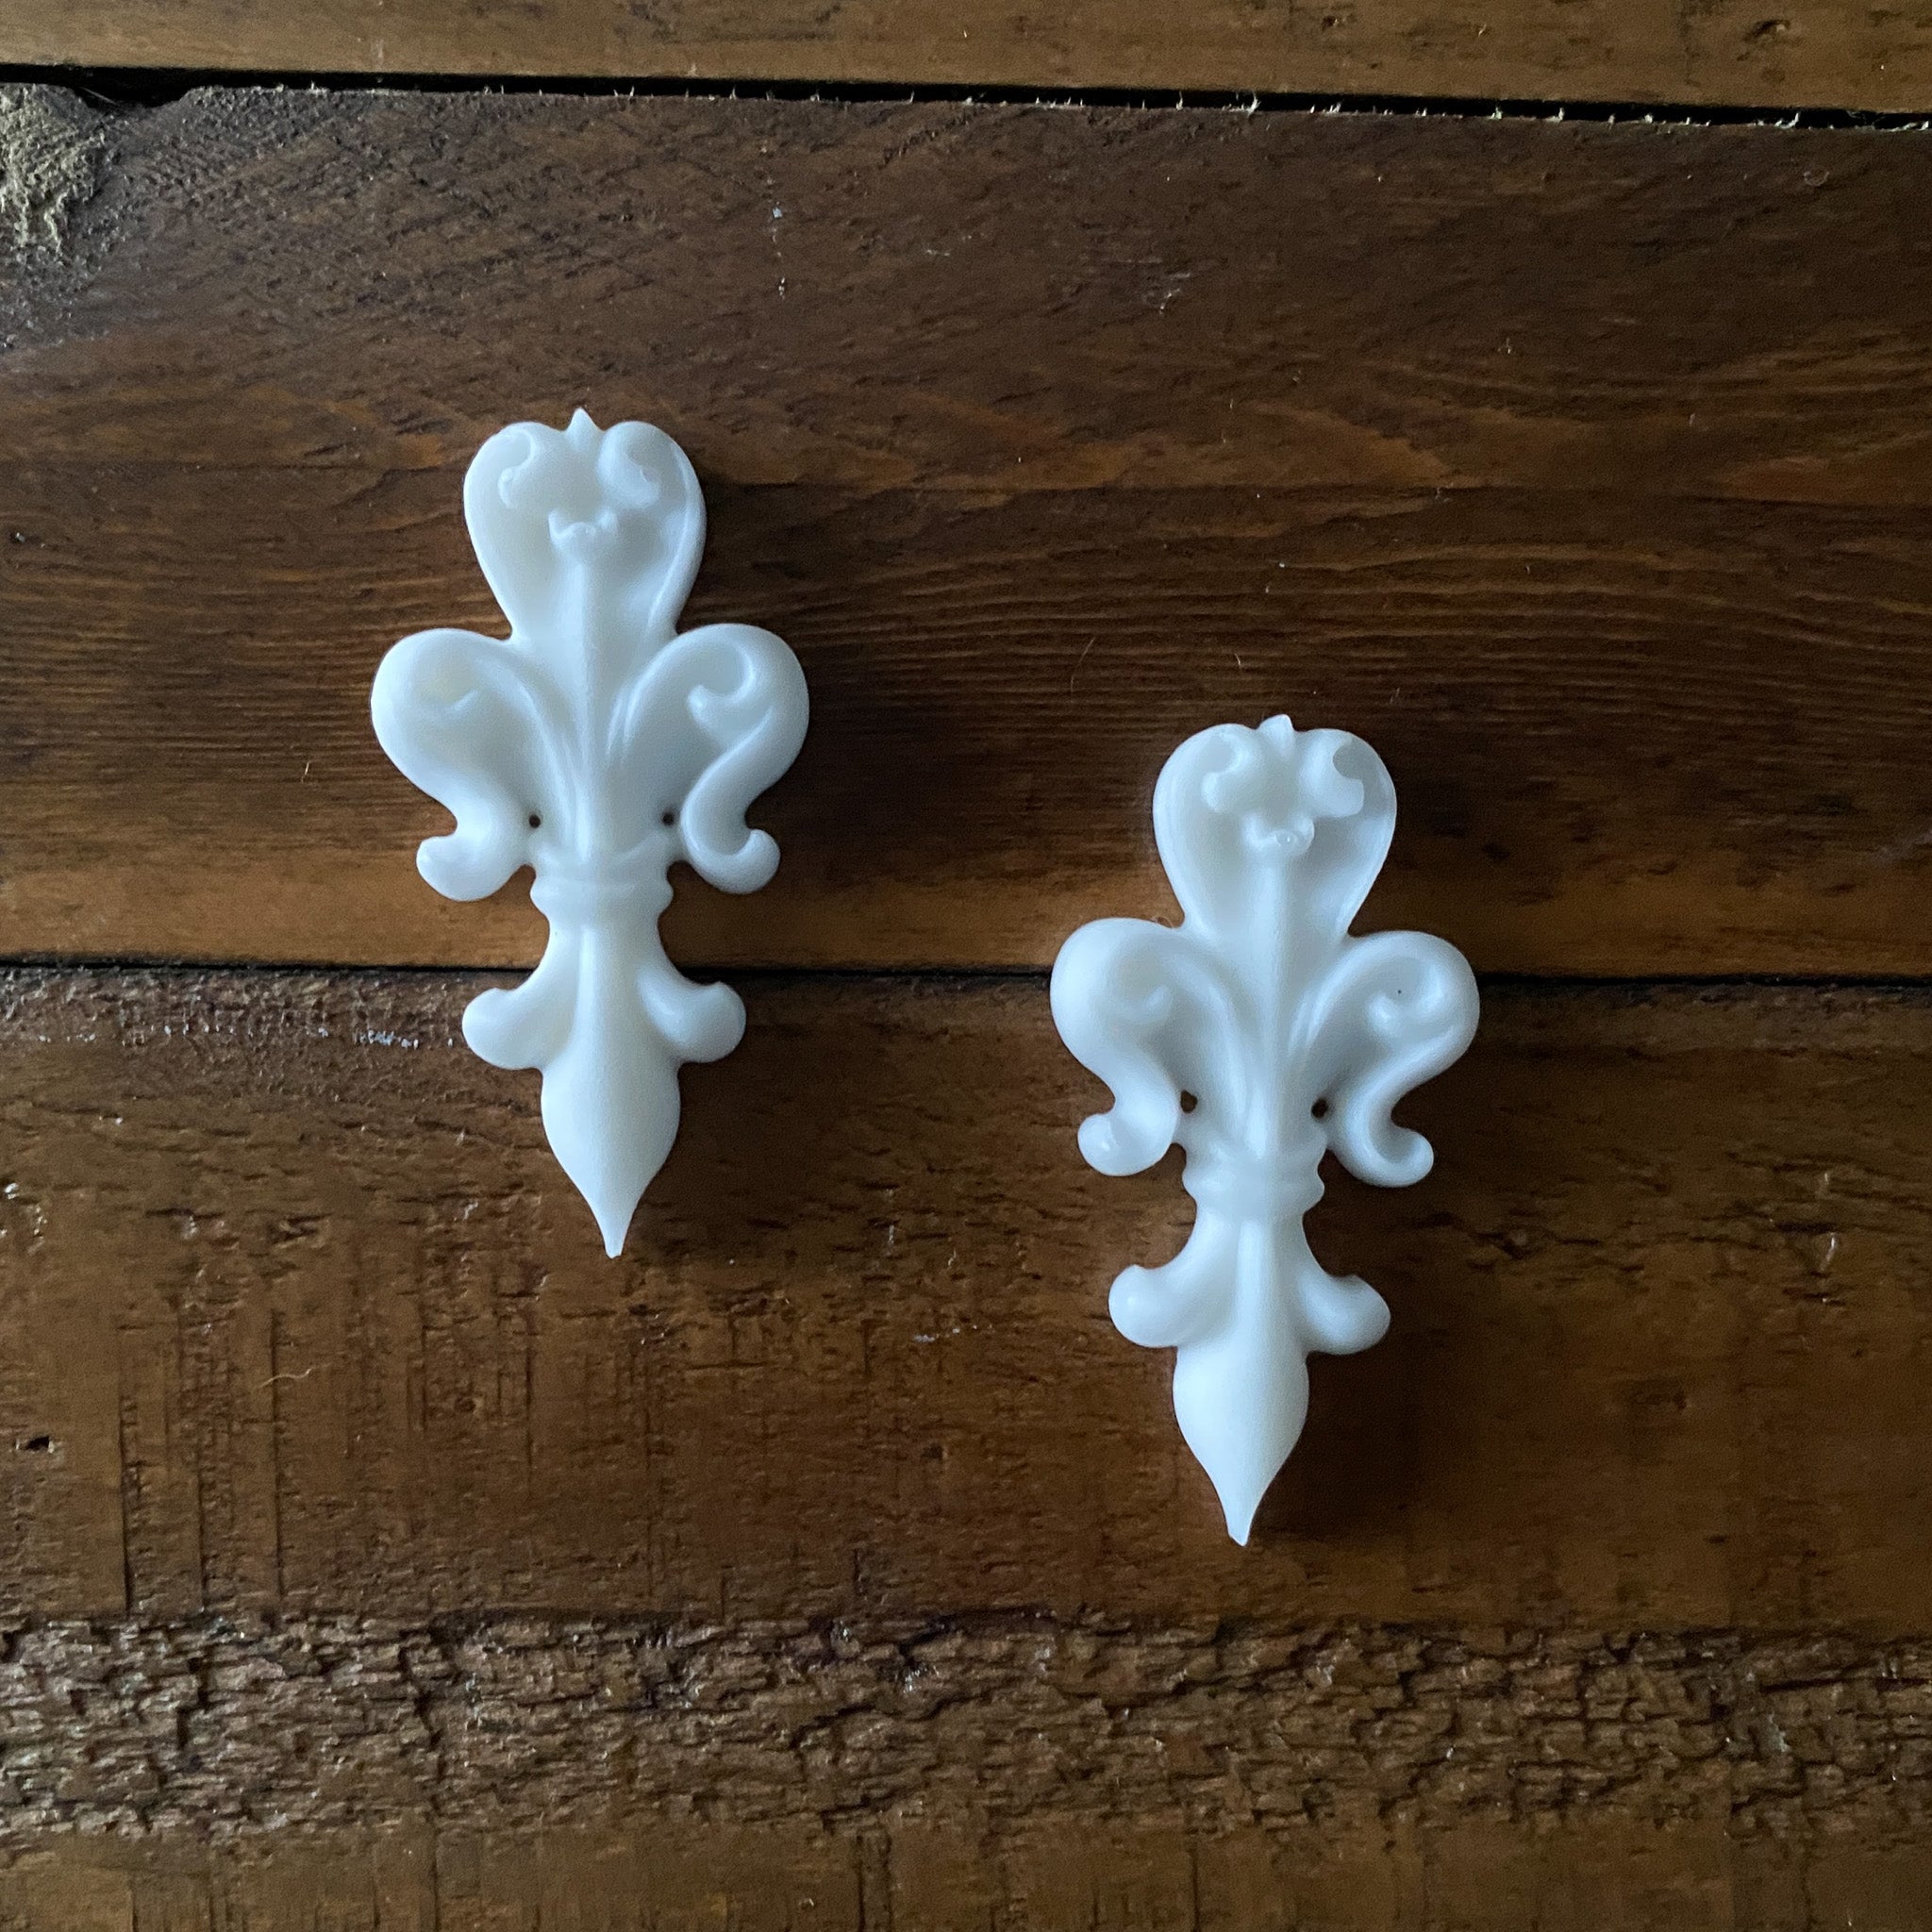 Two small white resin casted fleur de lis are against a wood background.